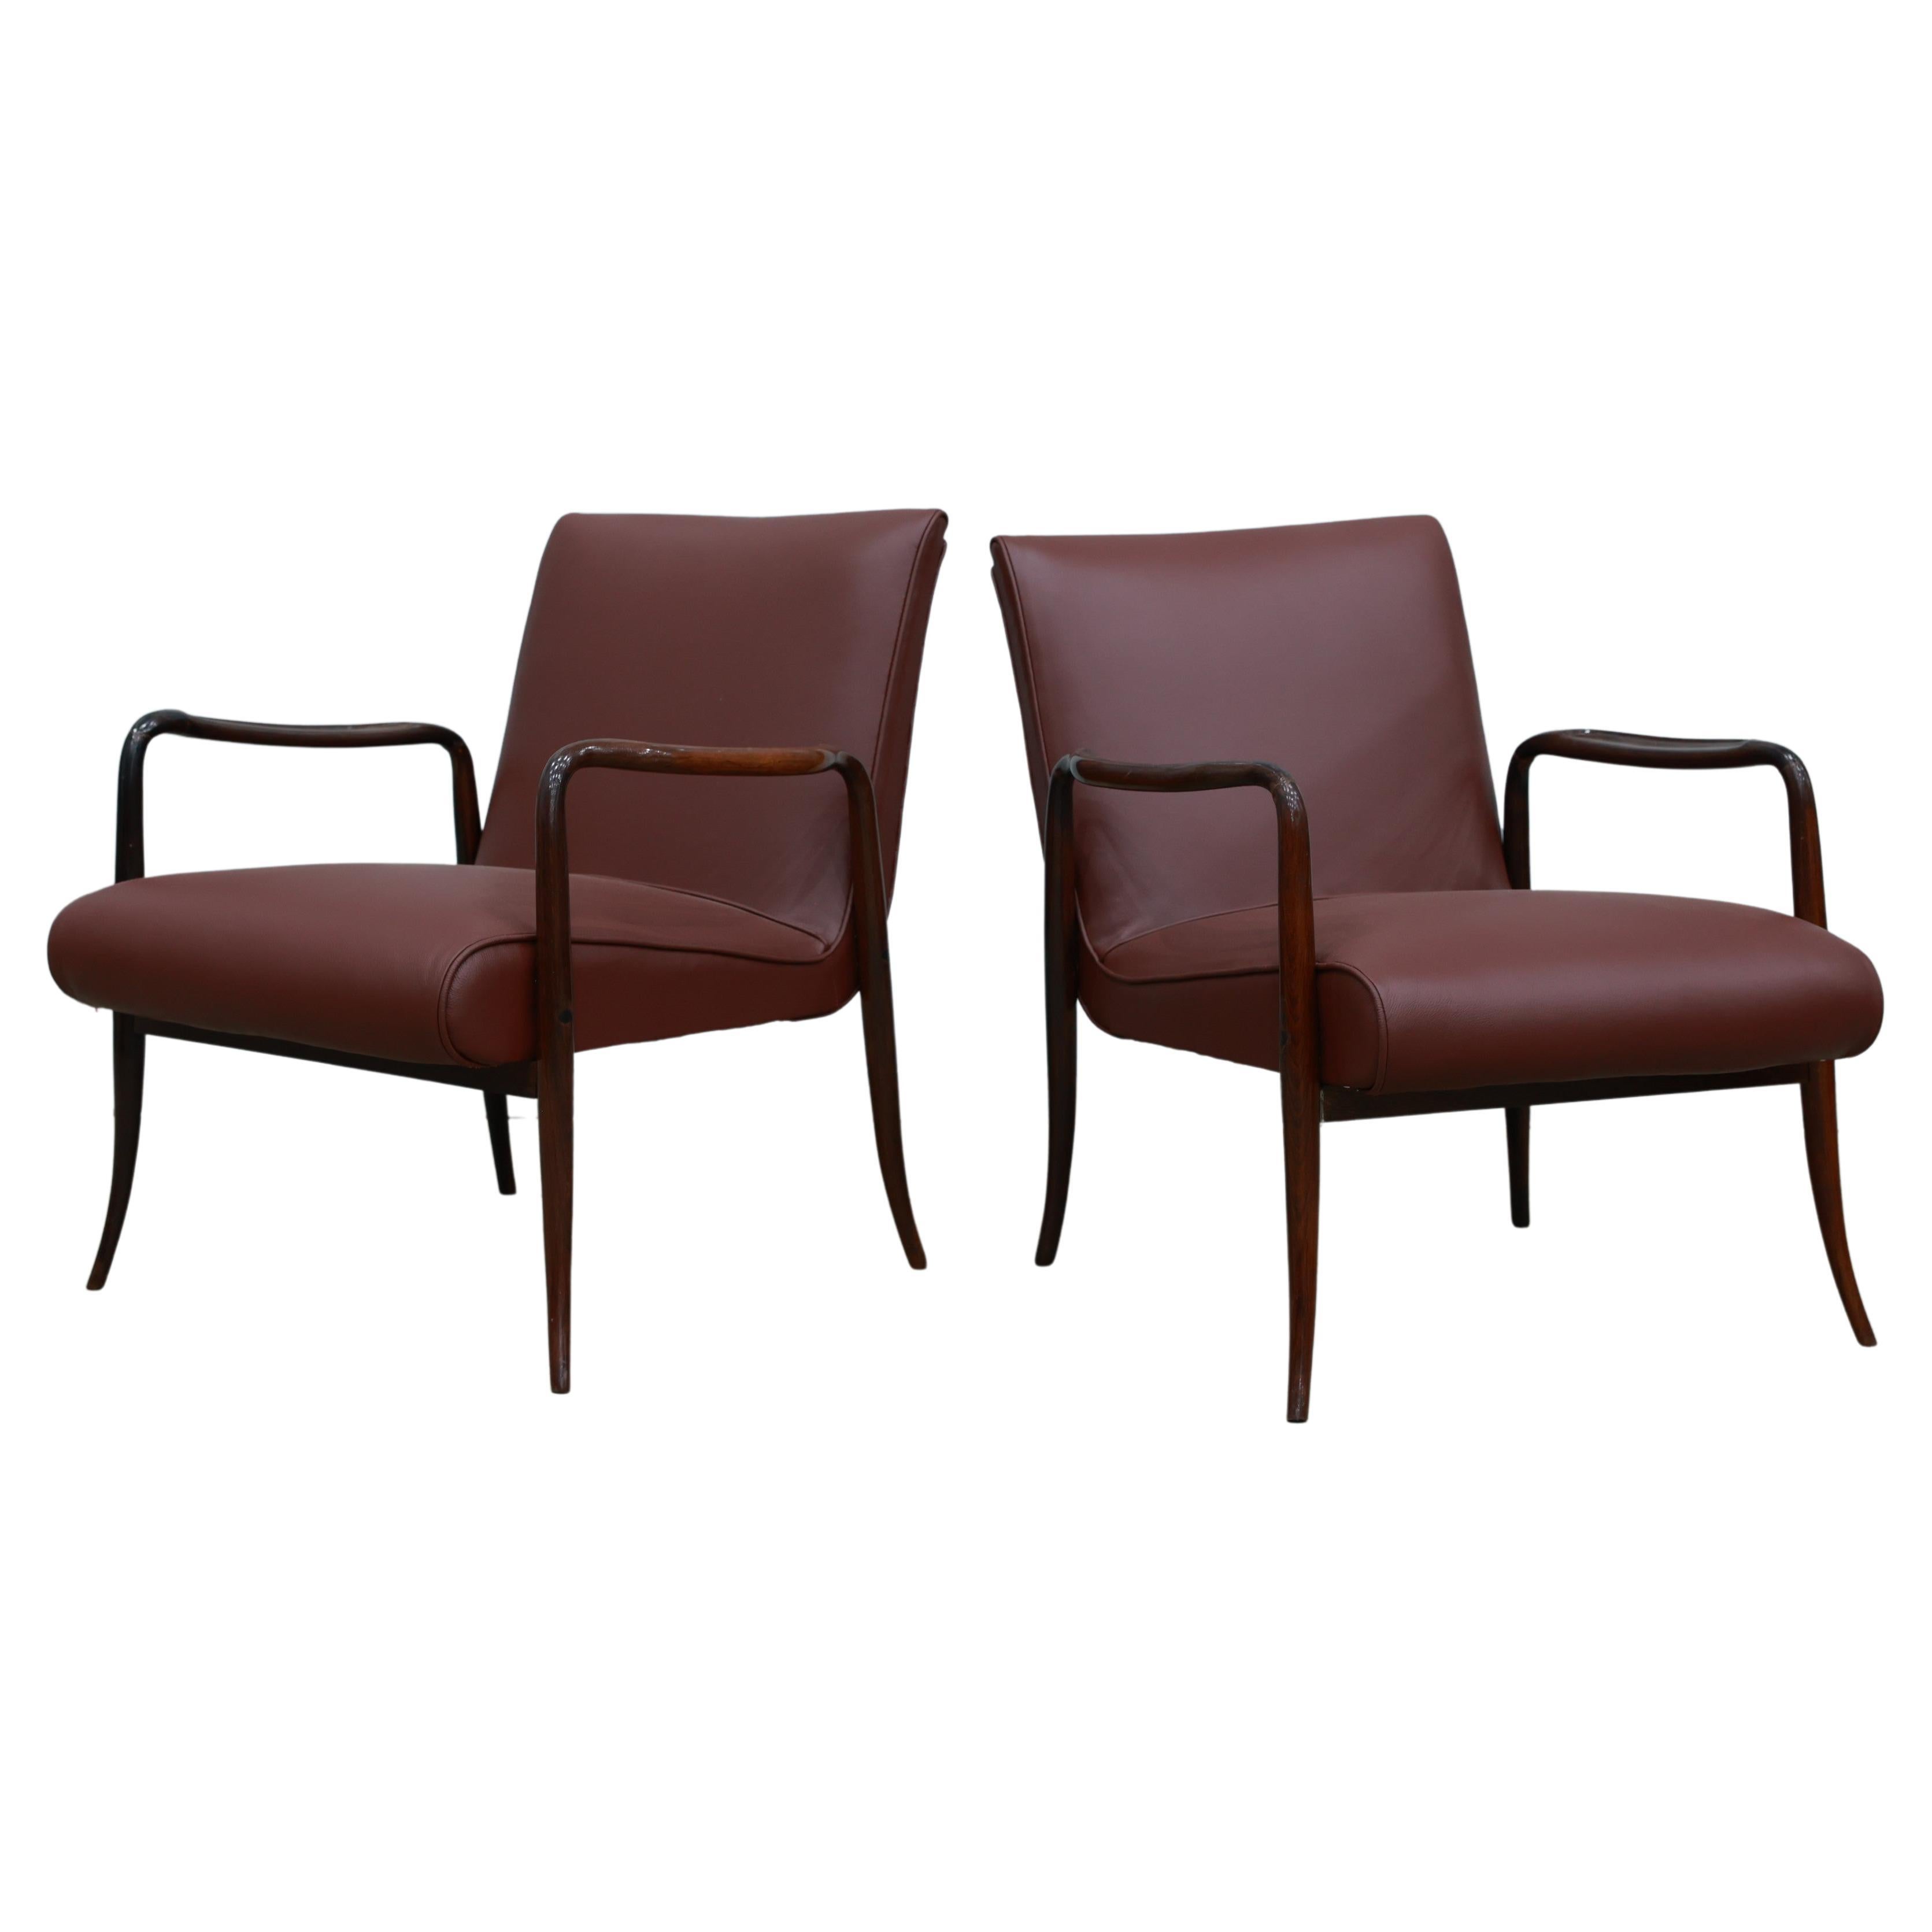 Pair of “Leve” armchairs in hardwood & leather by Joaquim Tenreiro, 1942, Brazil For Sale